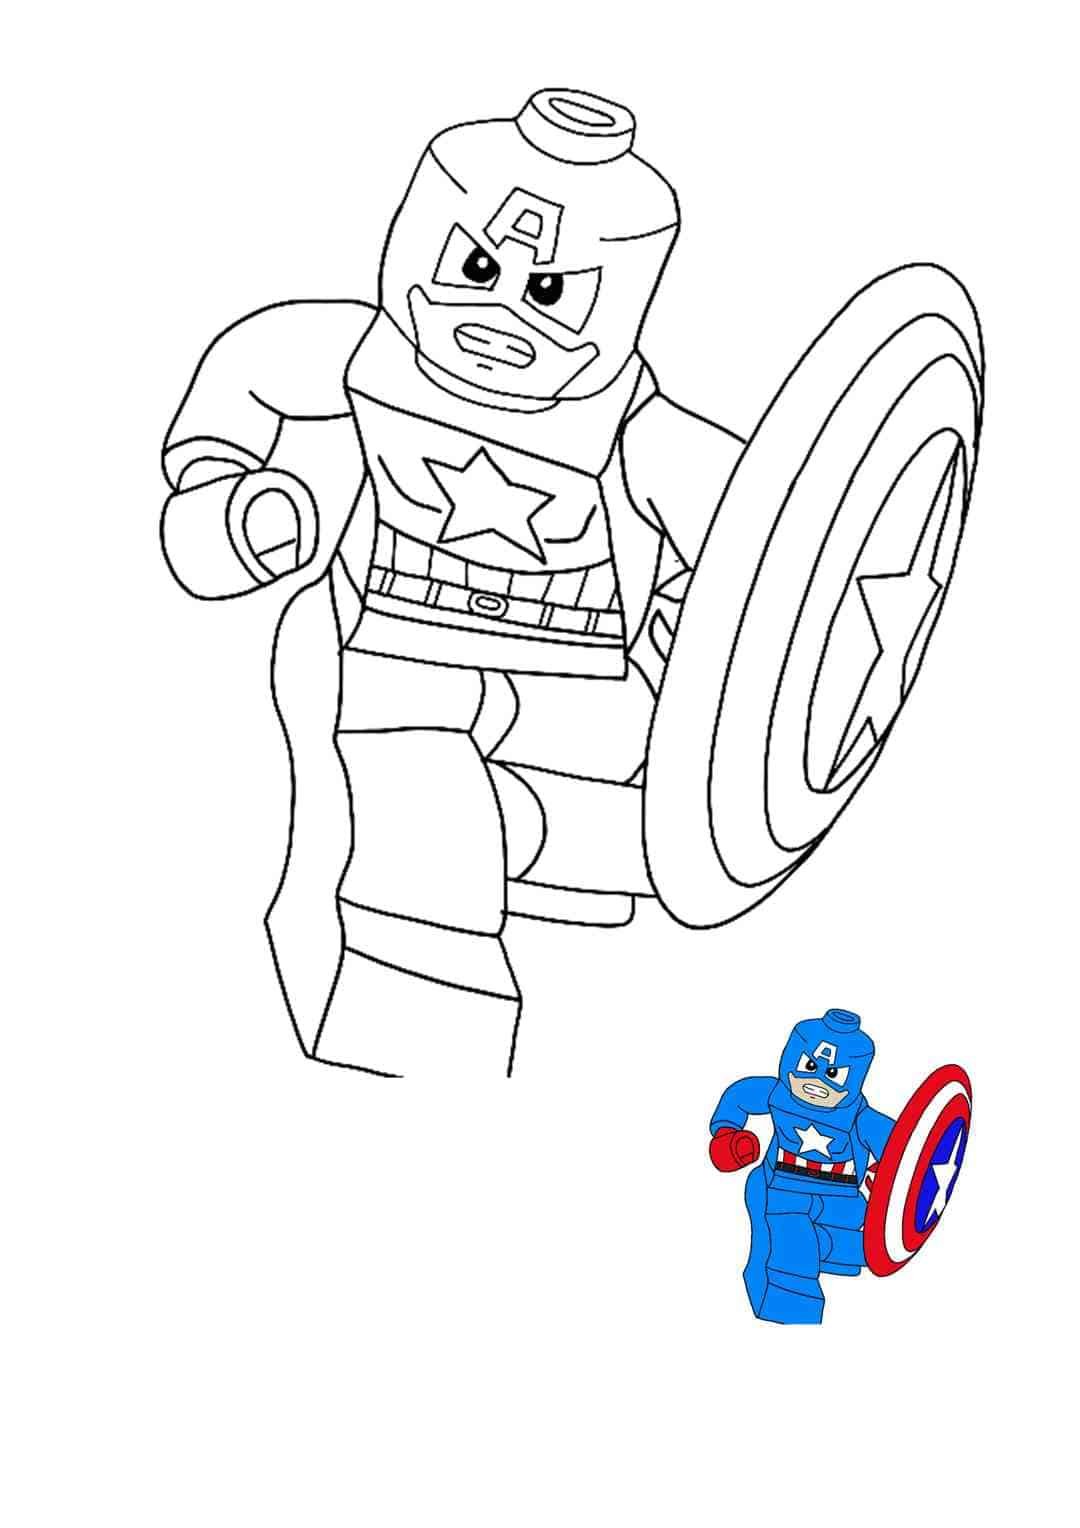 Captain America Lego coloring page with a sample